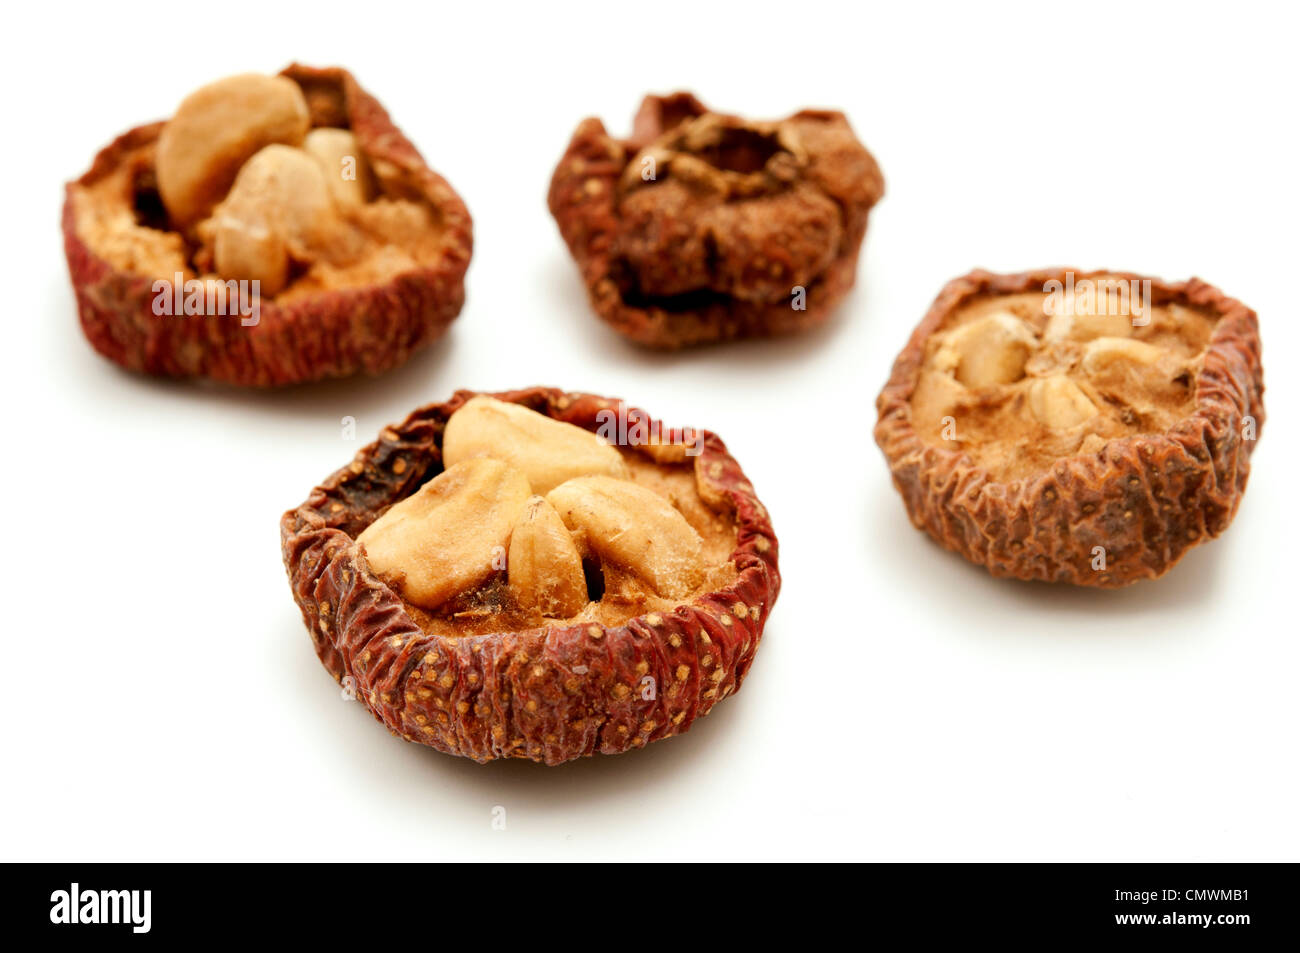 Dried fruits of chinese hawthorn on a white background Stock Photo